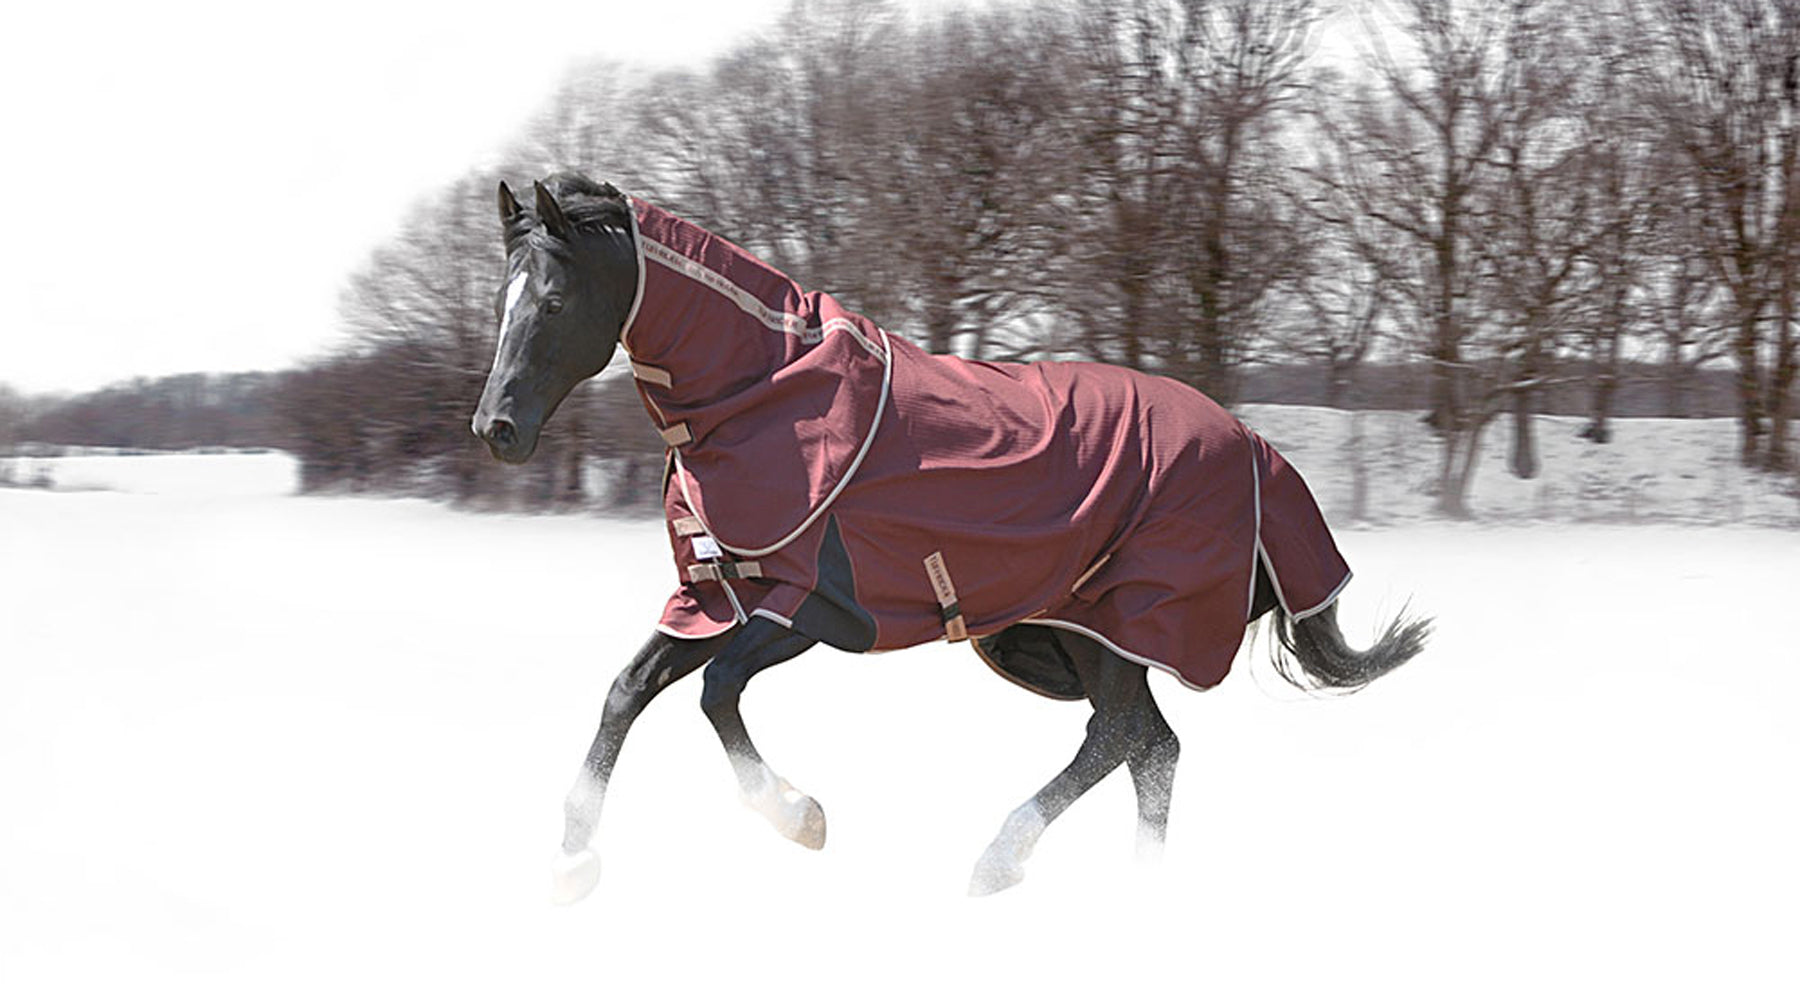 Grab Your Helmet, Long Socks, Winter Boots and Gloves! We’re Going to the Barn!